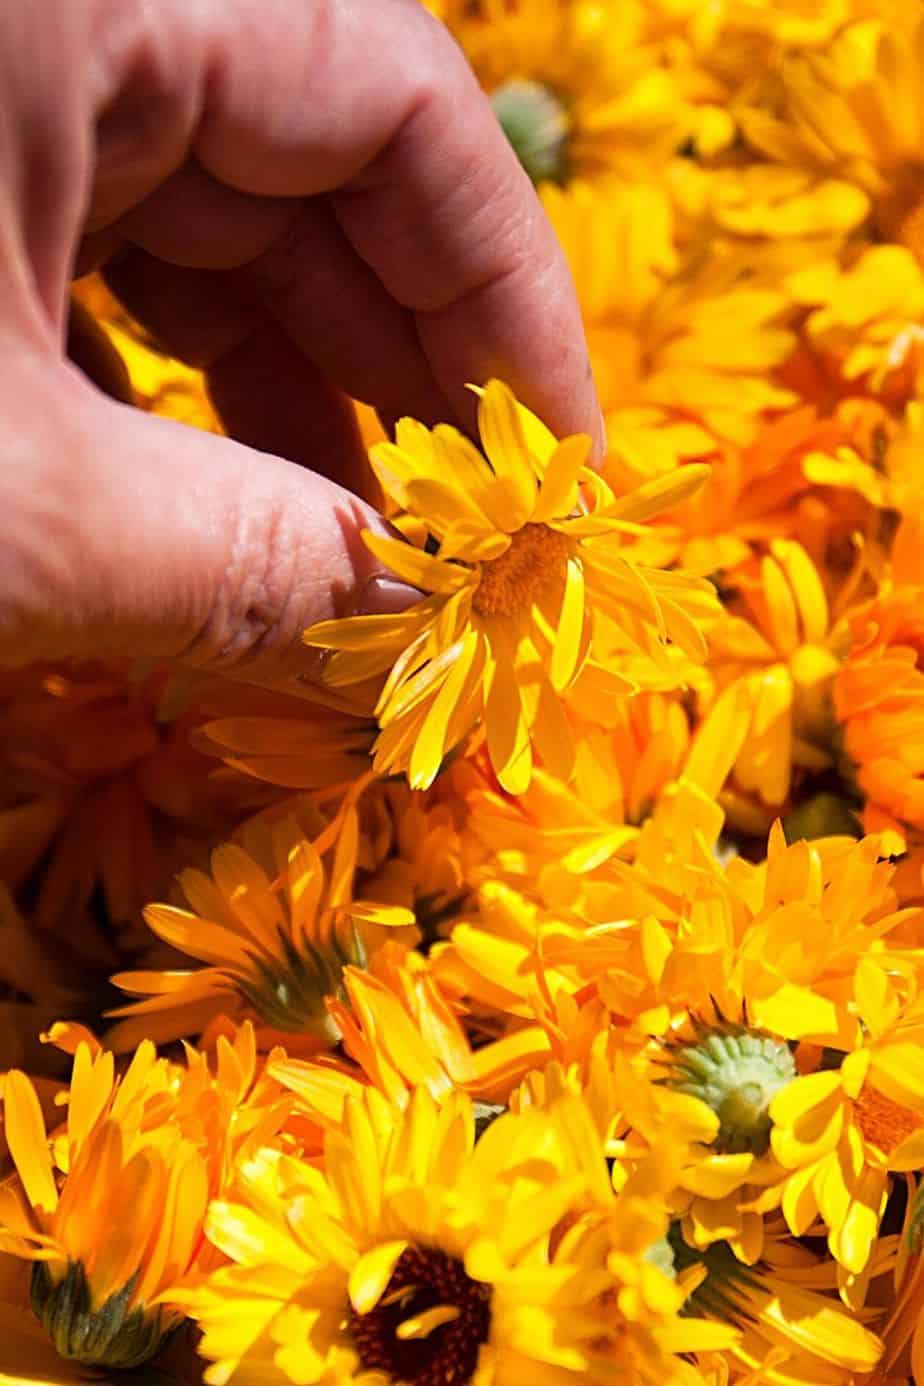 Check the marigold's flowers for curling and browning tips or the greening of its centers